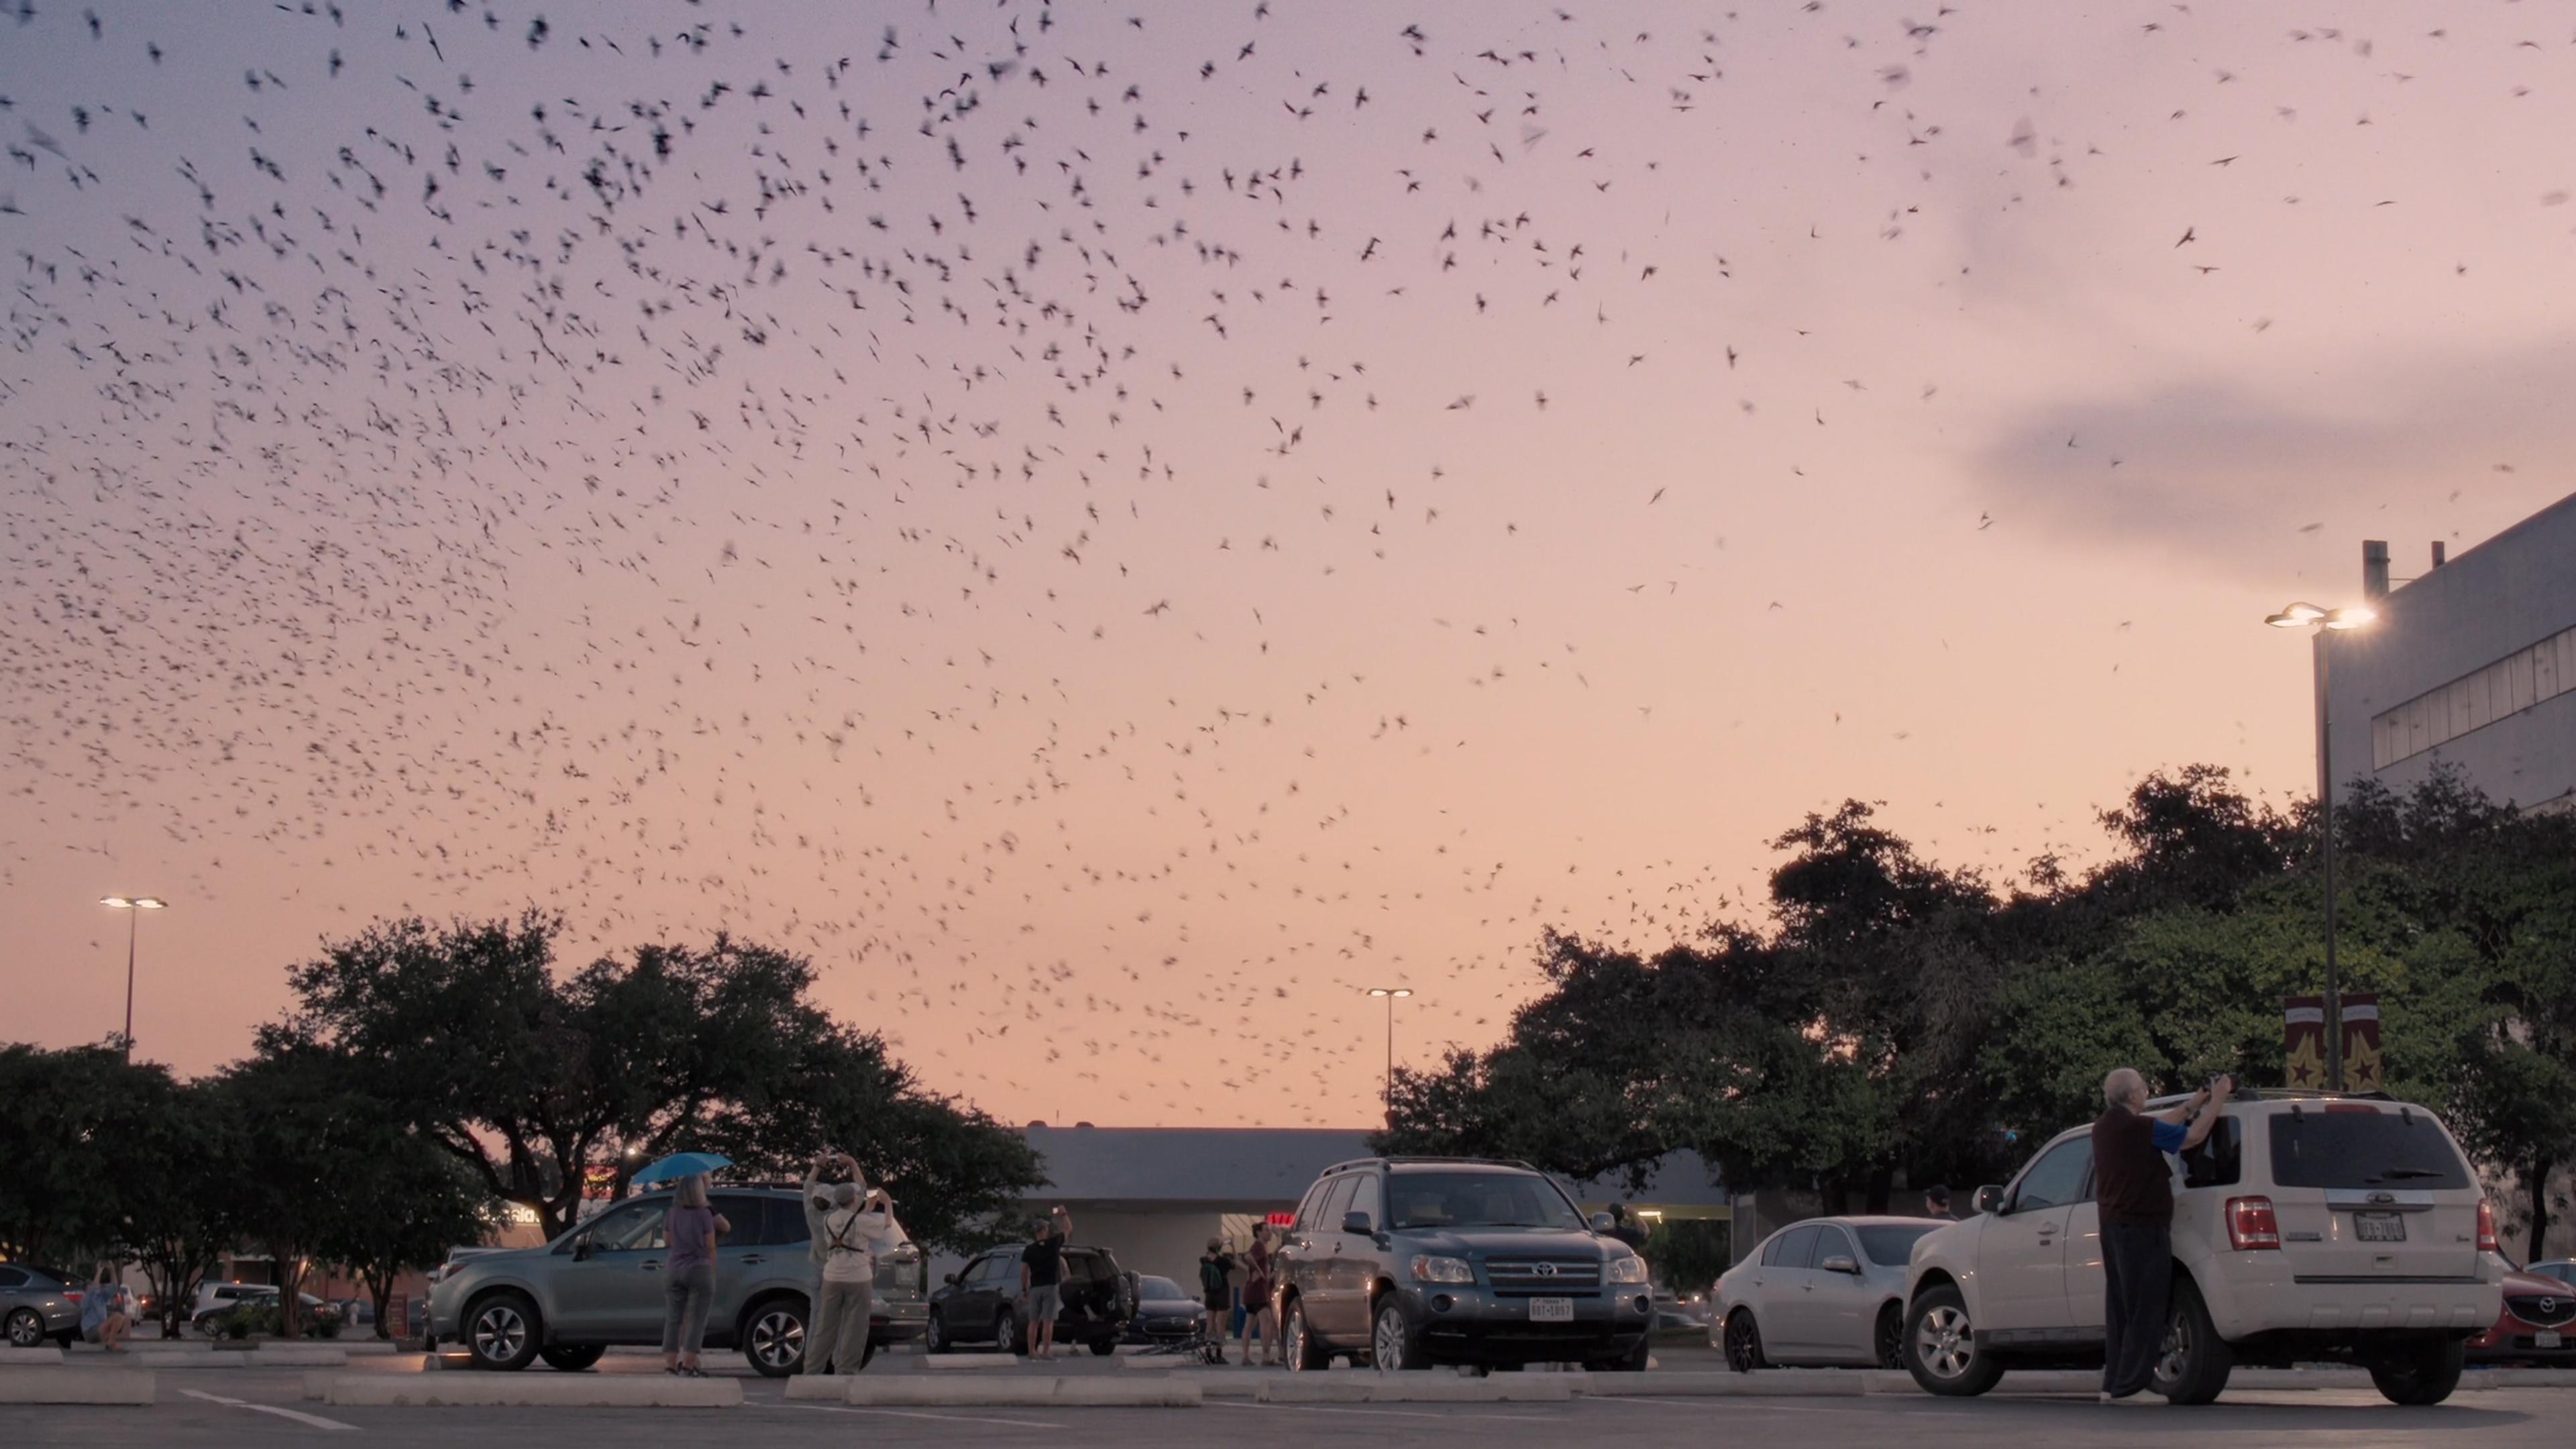 A large flock of birds fills the sky at dusk over a car park, where people with binoculars observe them from beside their vehicles.